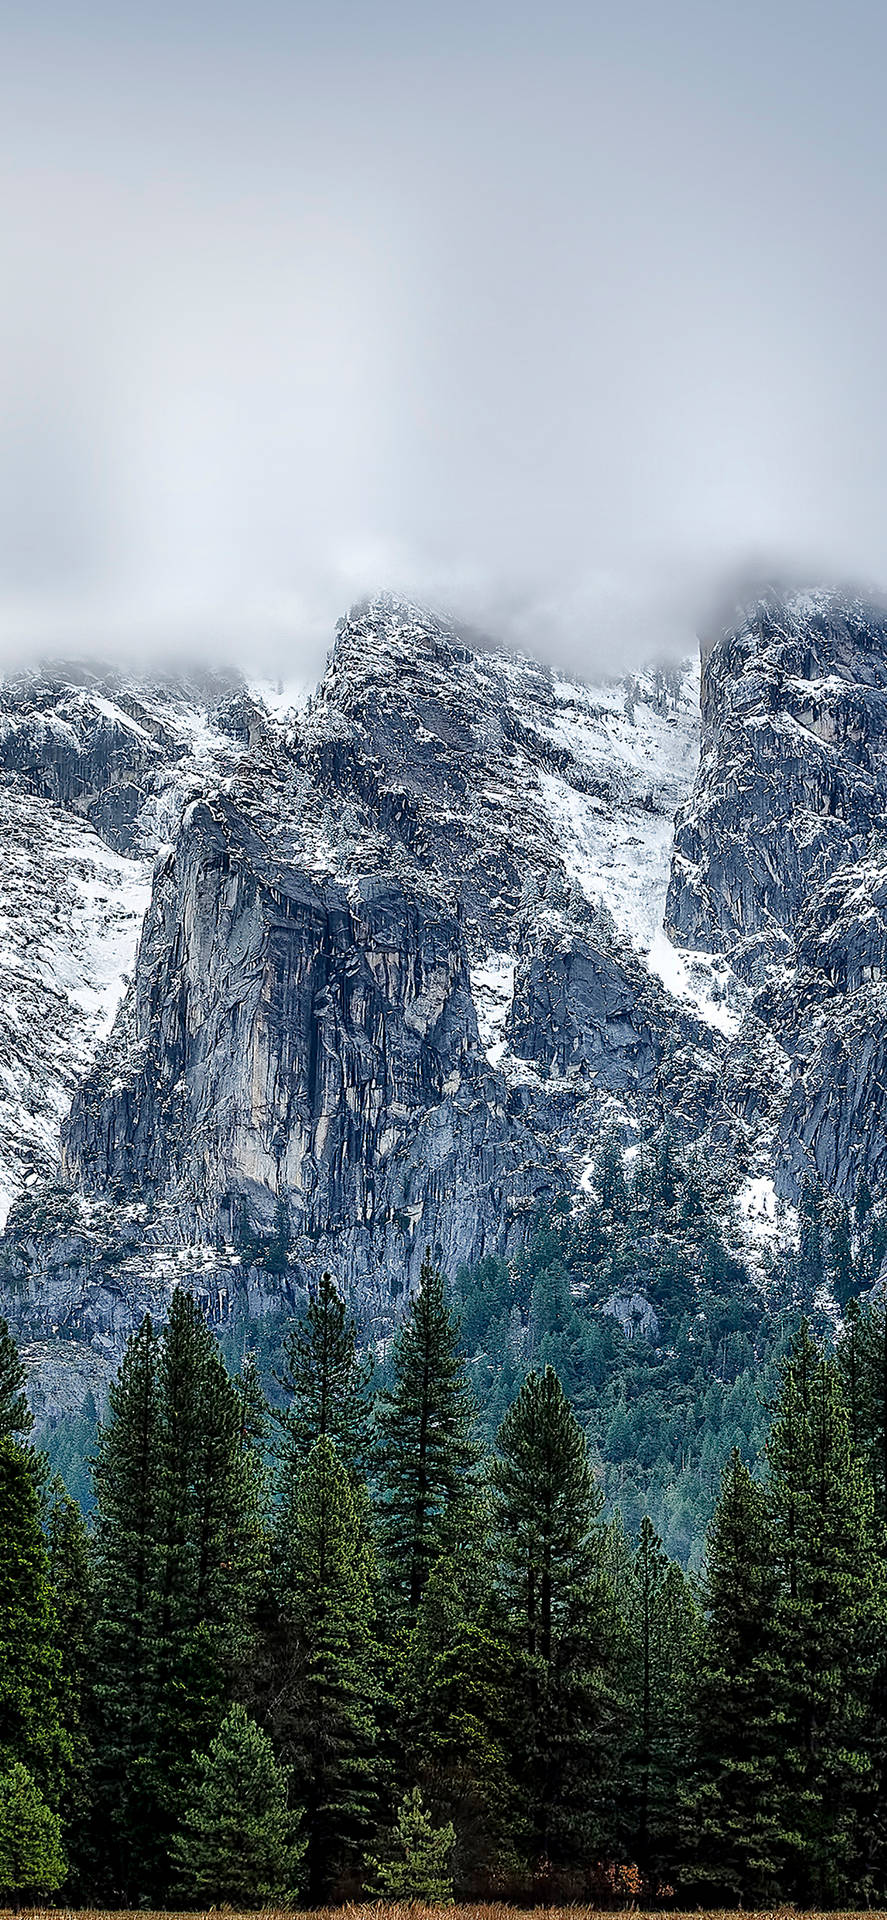 Enjoy the beauty of Yosemite on your iPhone Wallpaper